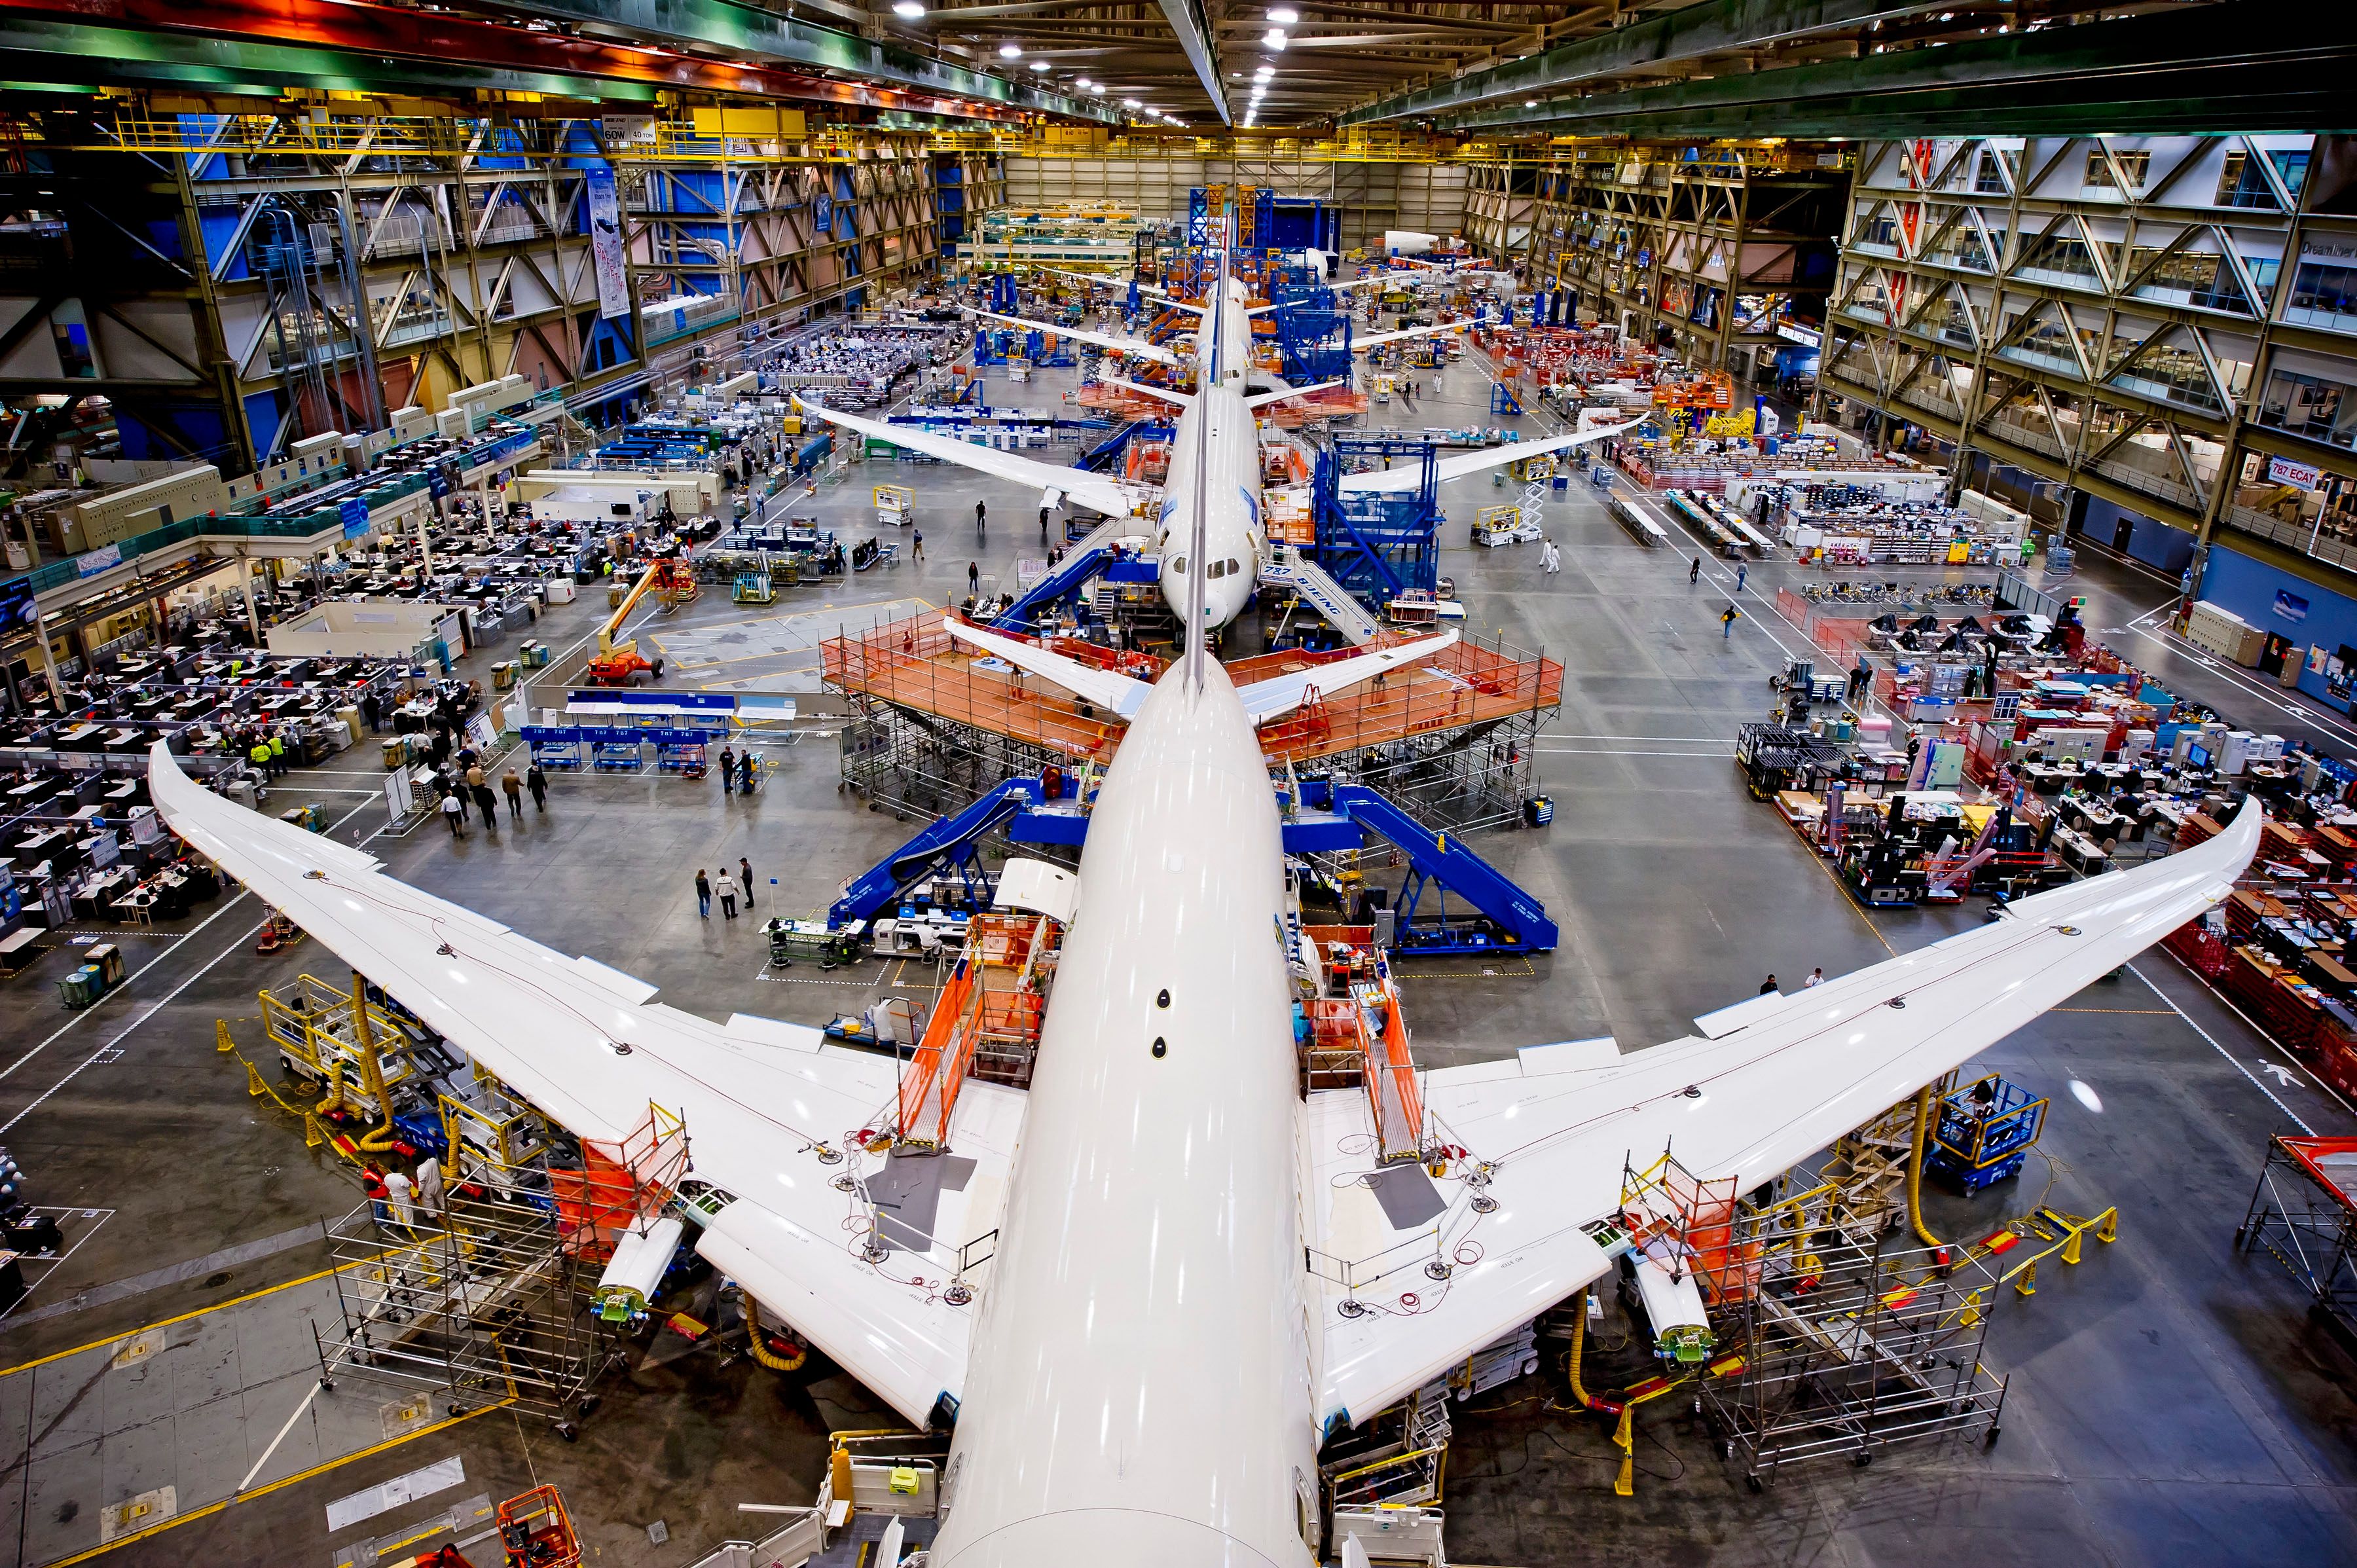 Boring 787 production in Seattle